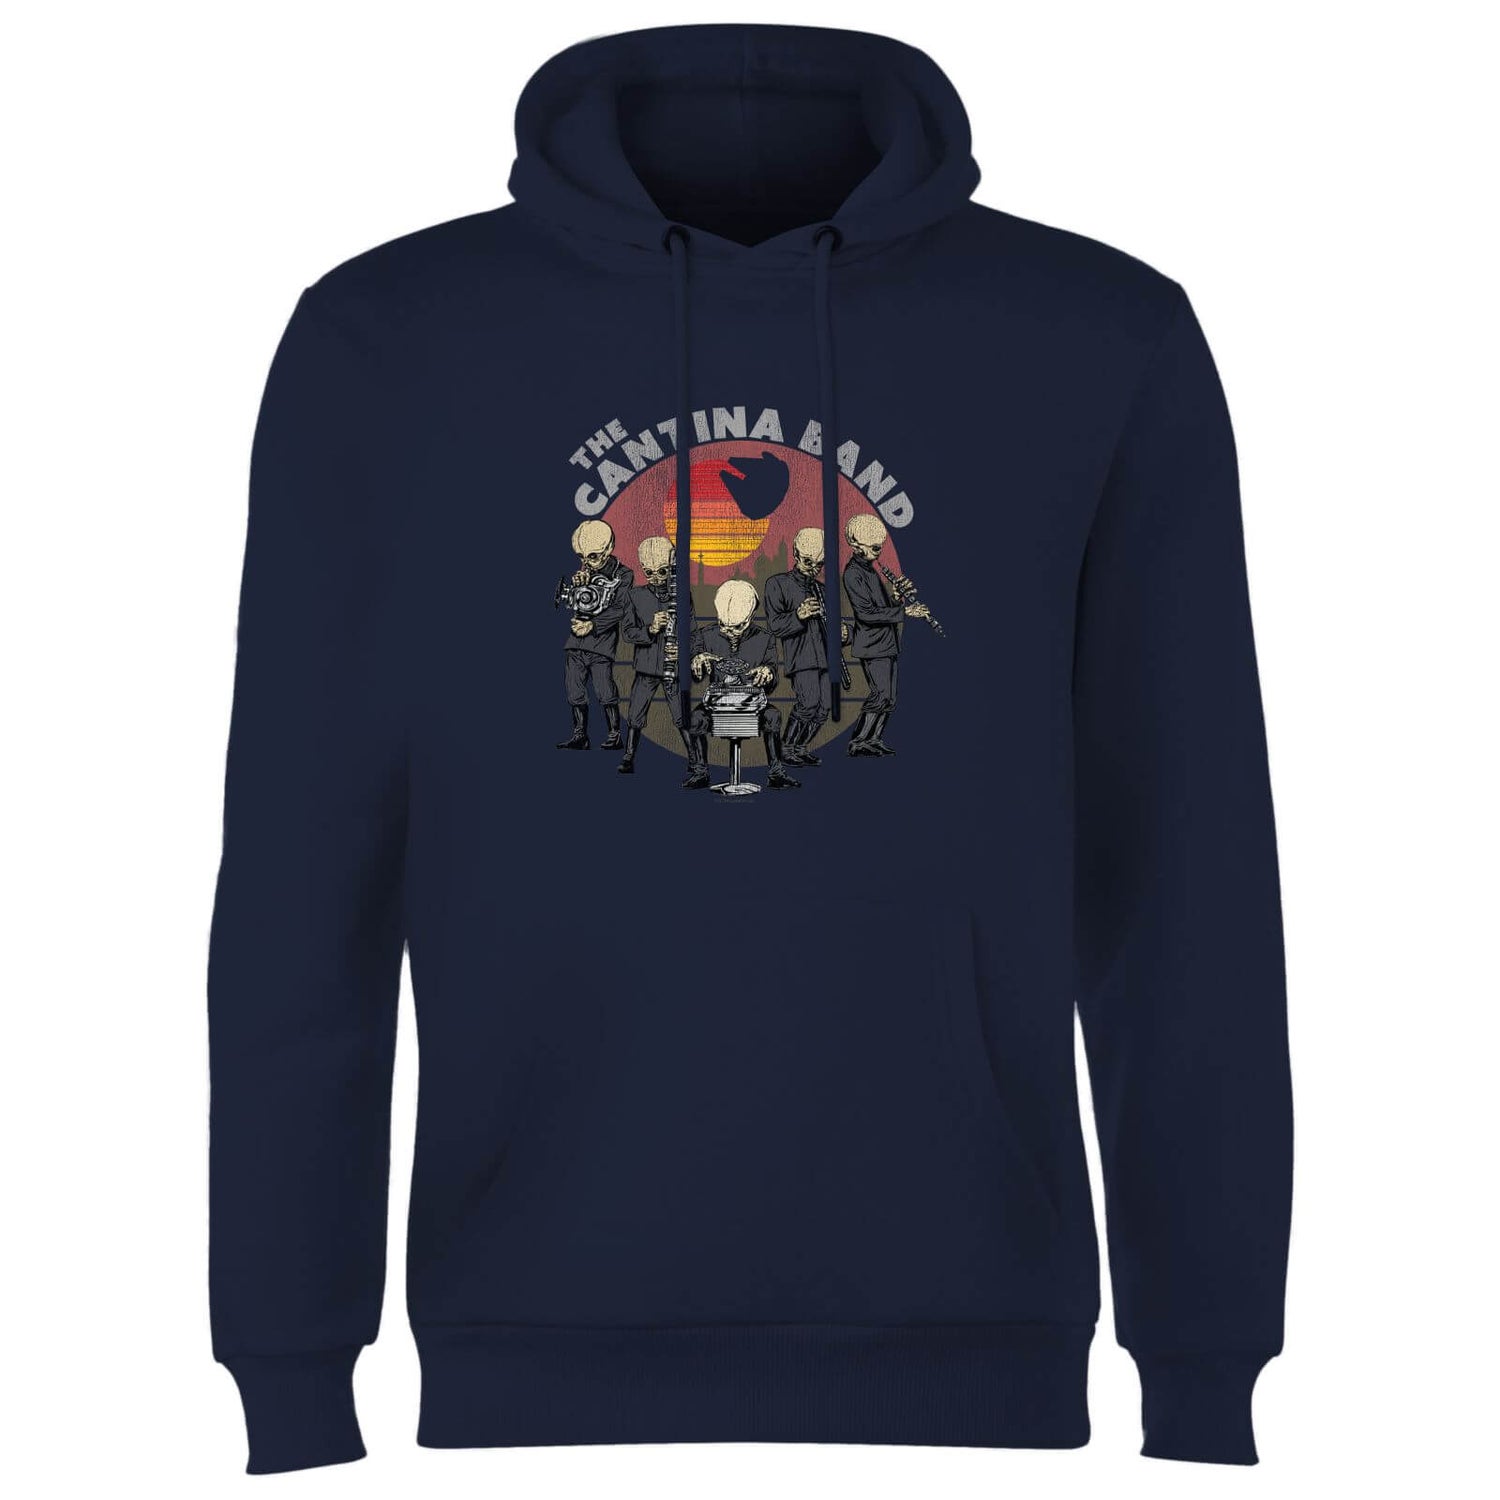 Star Wars Classic Cantina Band Hoodie - Navy